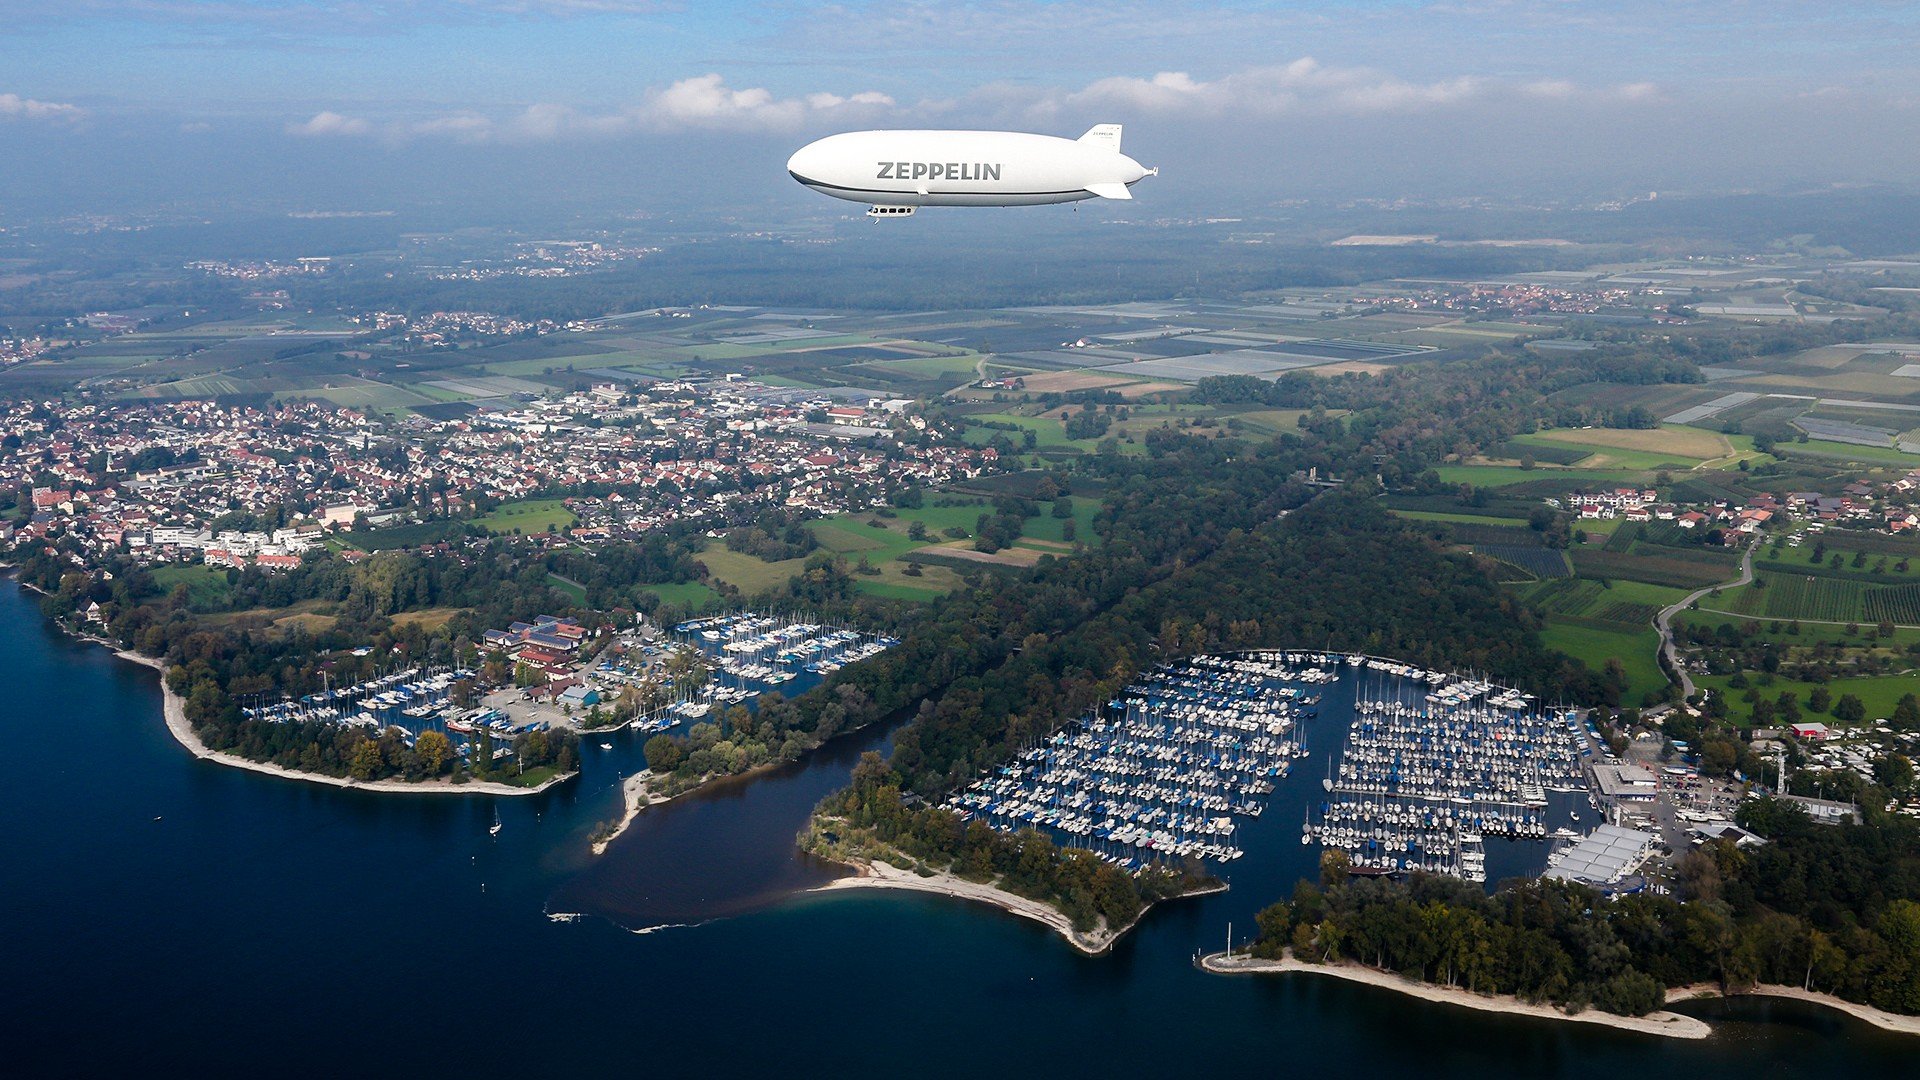 Blimps are back, with Zeppelin already running 12 routes across Europe and targeting the Chinese market